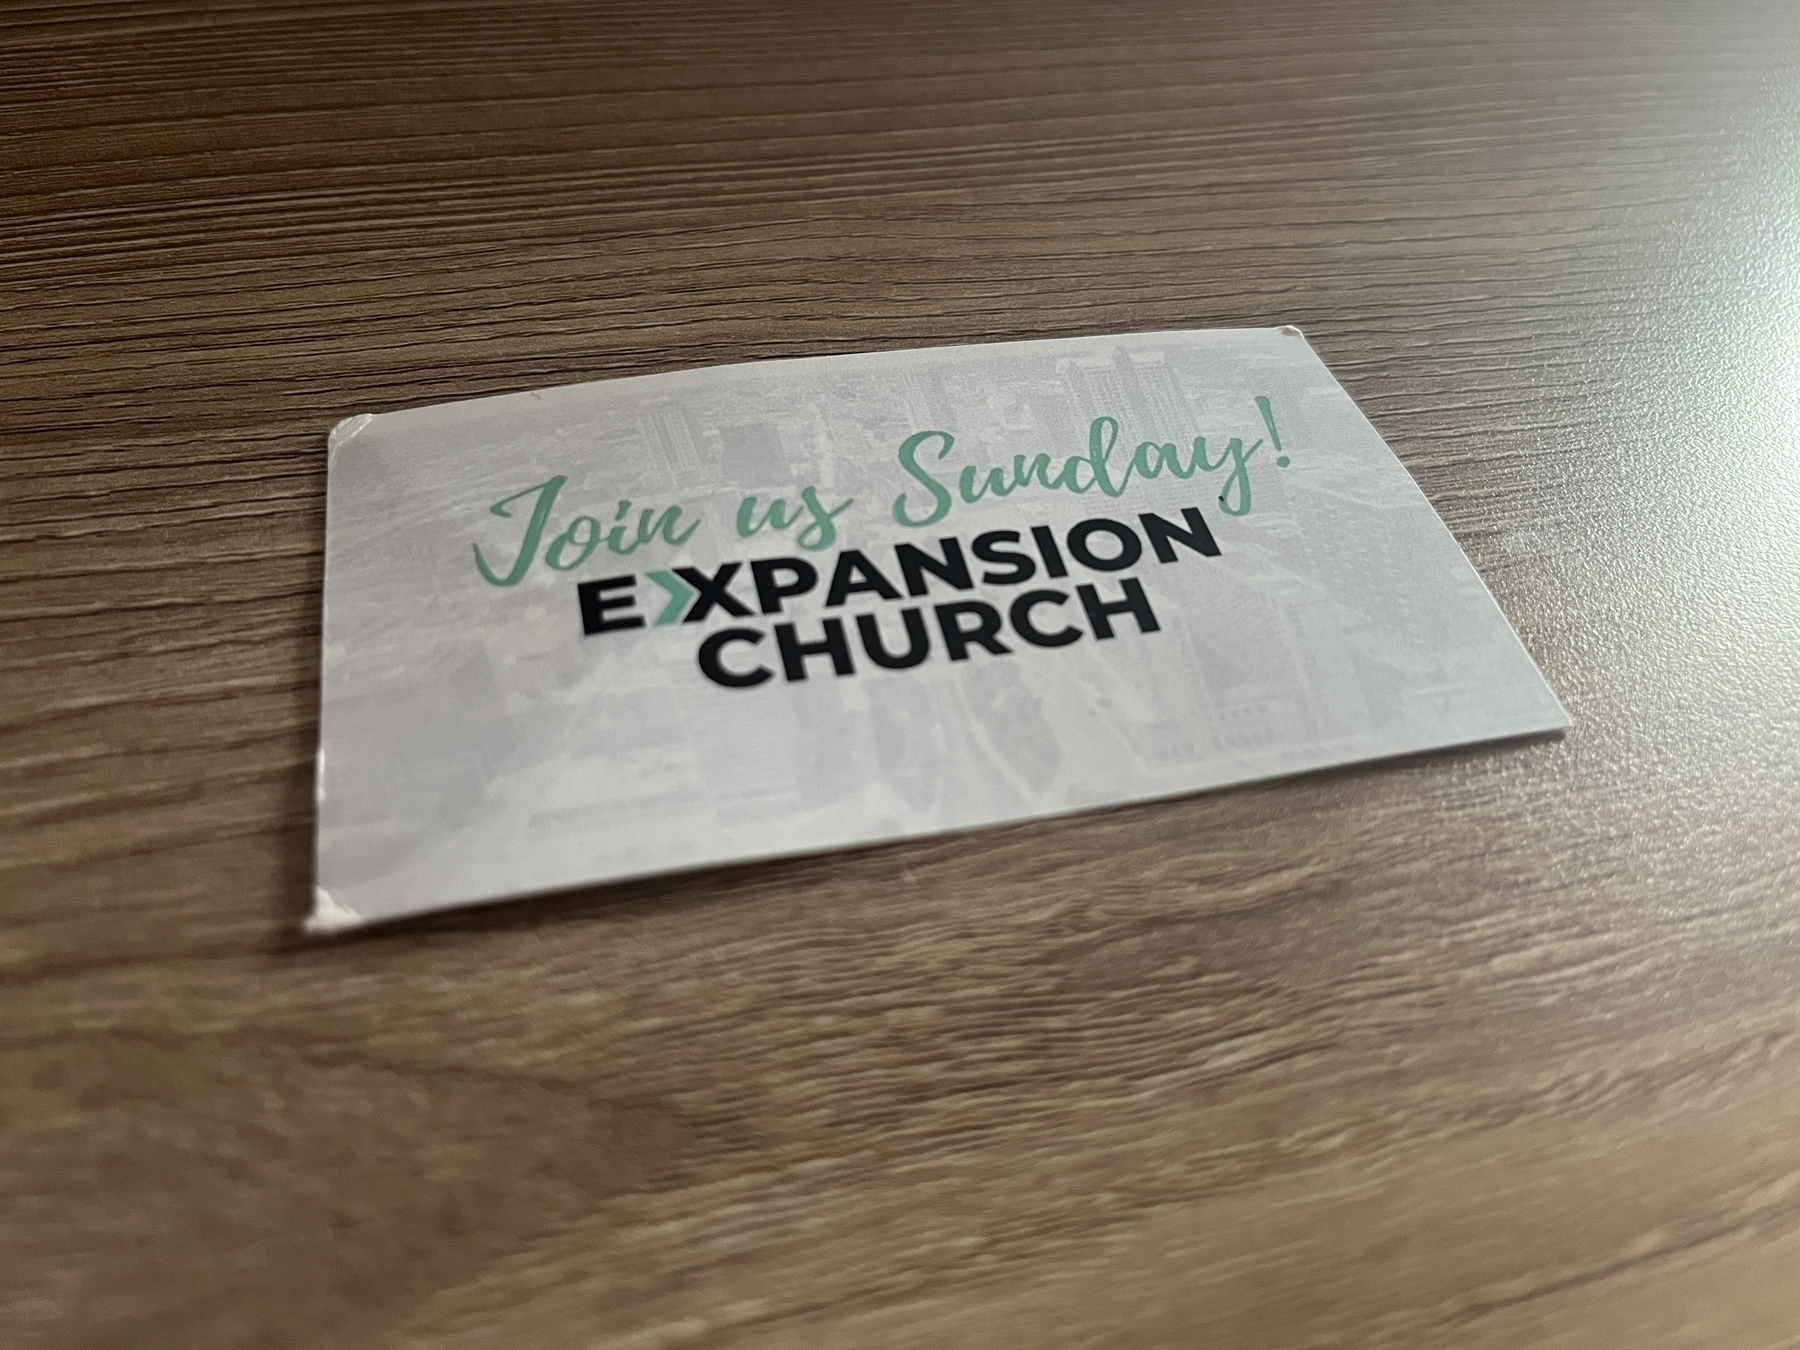 A business card that says “join us Sunday! Expansion Church” rests on a wooden table